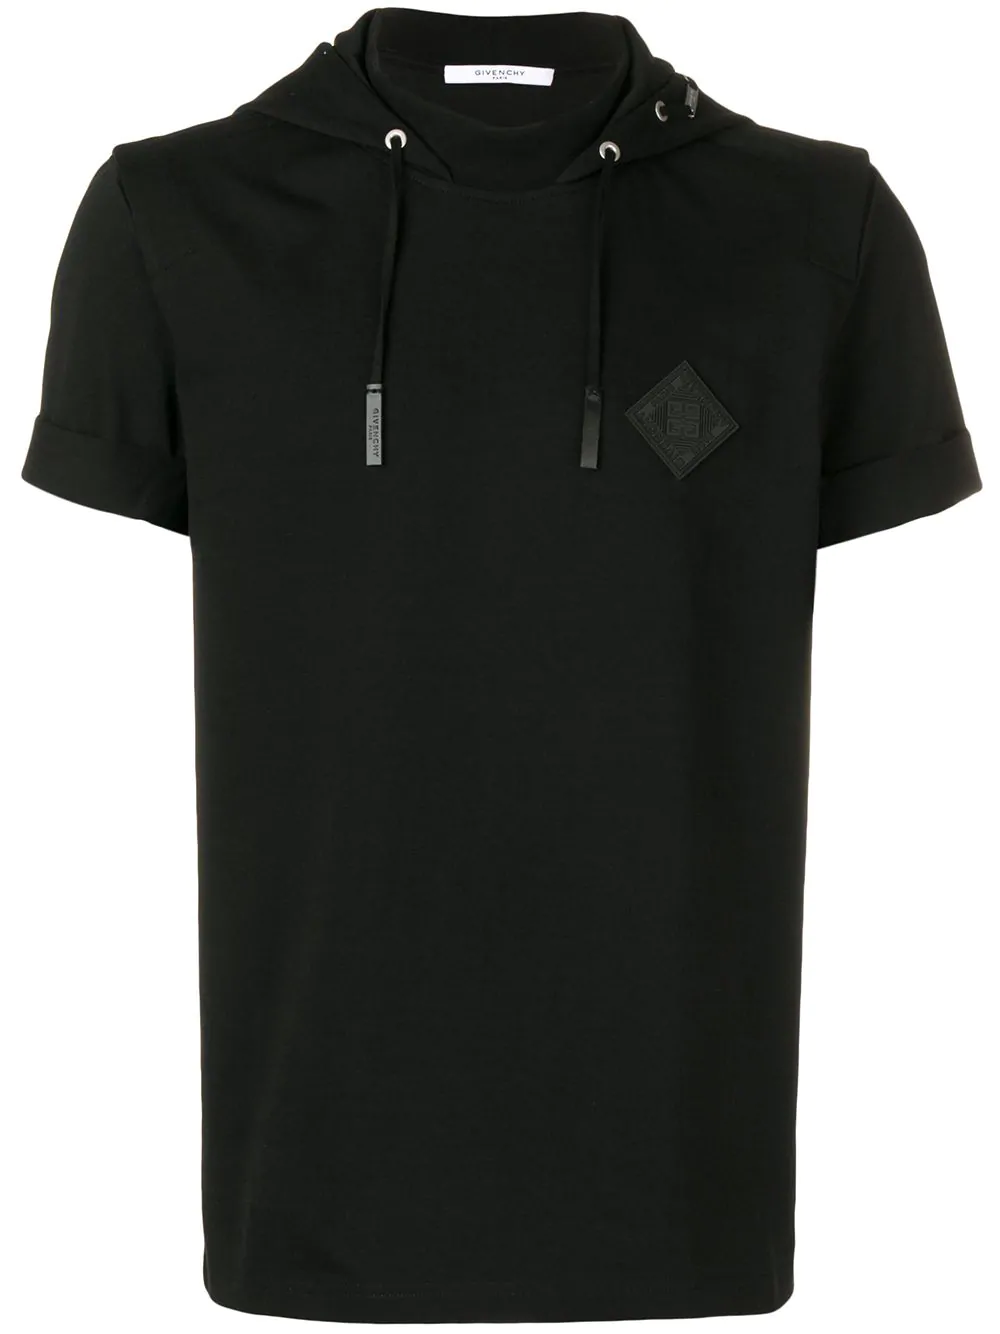 Givenchy Short Sleeve Hoodie - Black 